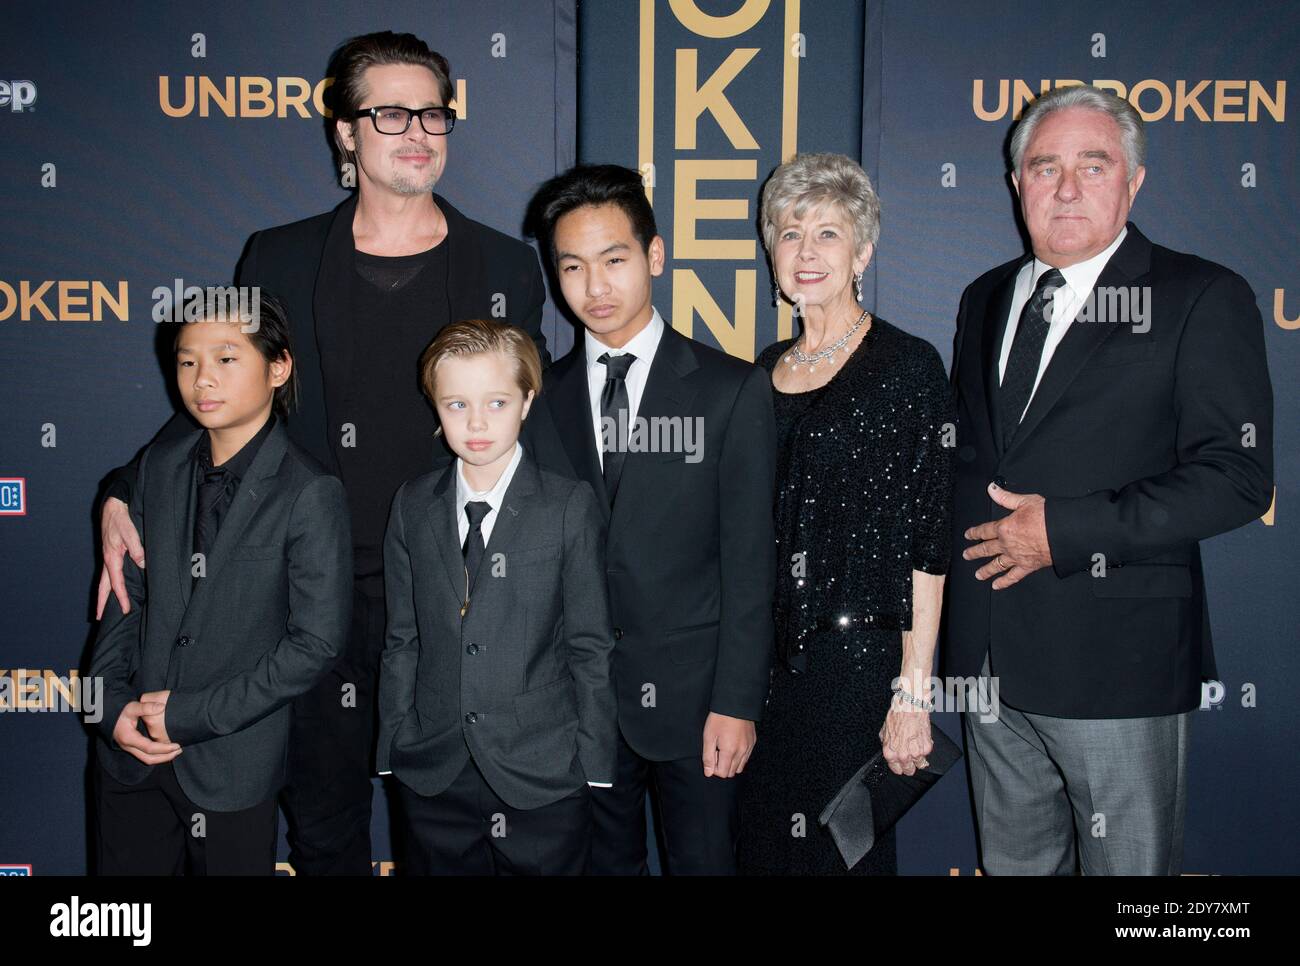 Brad Pitt, Pax Thien Jolie-Pitt, Shiloh Nouvel Jolie-Pitt, Maddox Jolie-Pitt, Jane Pitt and William Pitt attend the premiere of Universal Studios Unbroken at TCL Chinese Theatre on December 15, 2014 in Los Angeles, CA, USA. Photo by Lionel Hahn/ABACAPRESS.COM Stock Photo